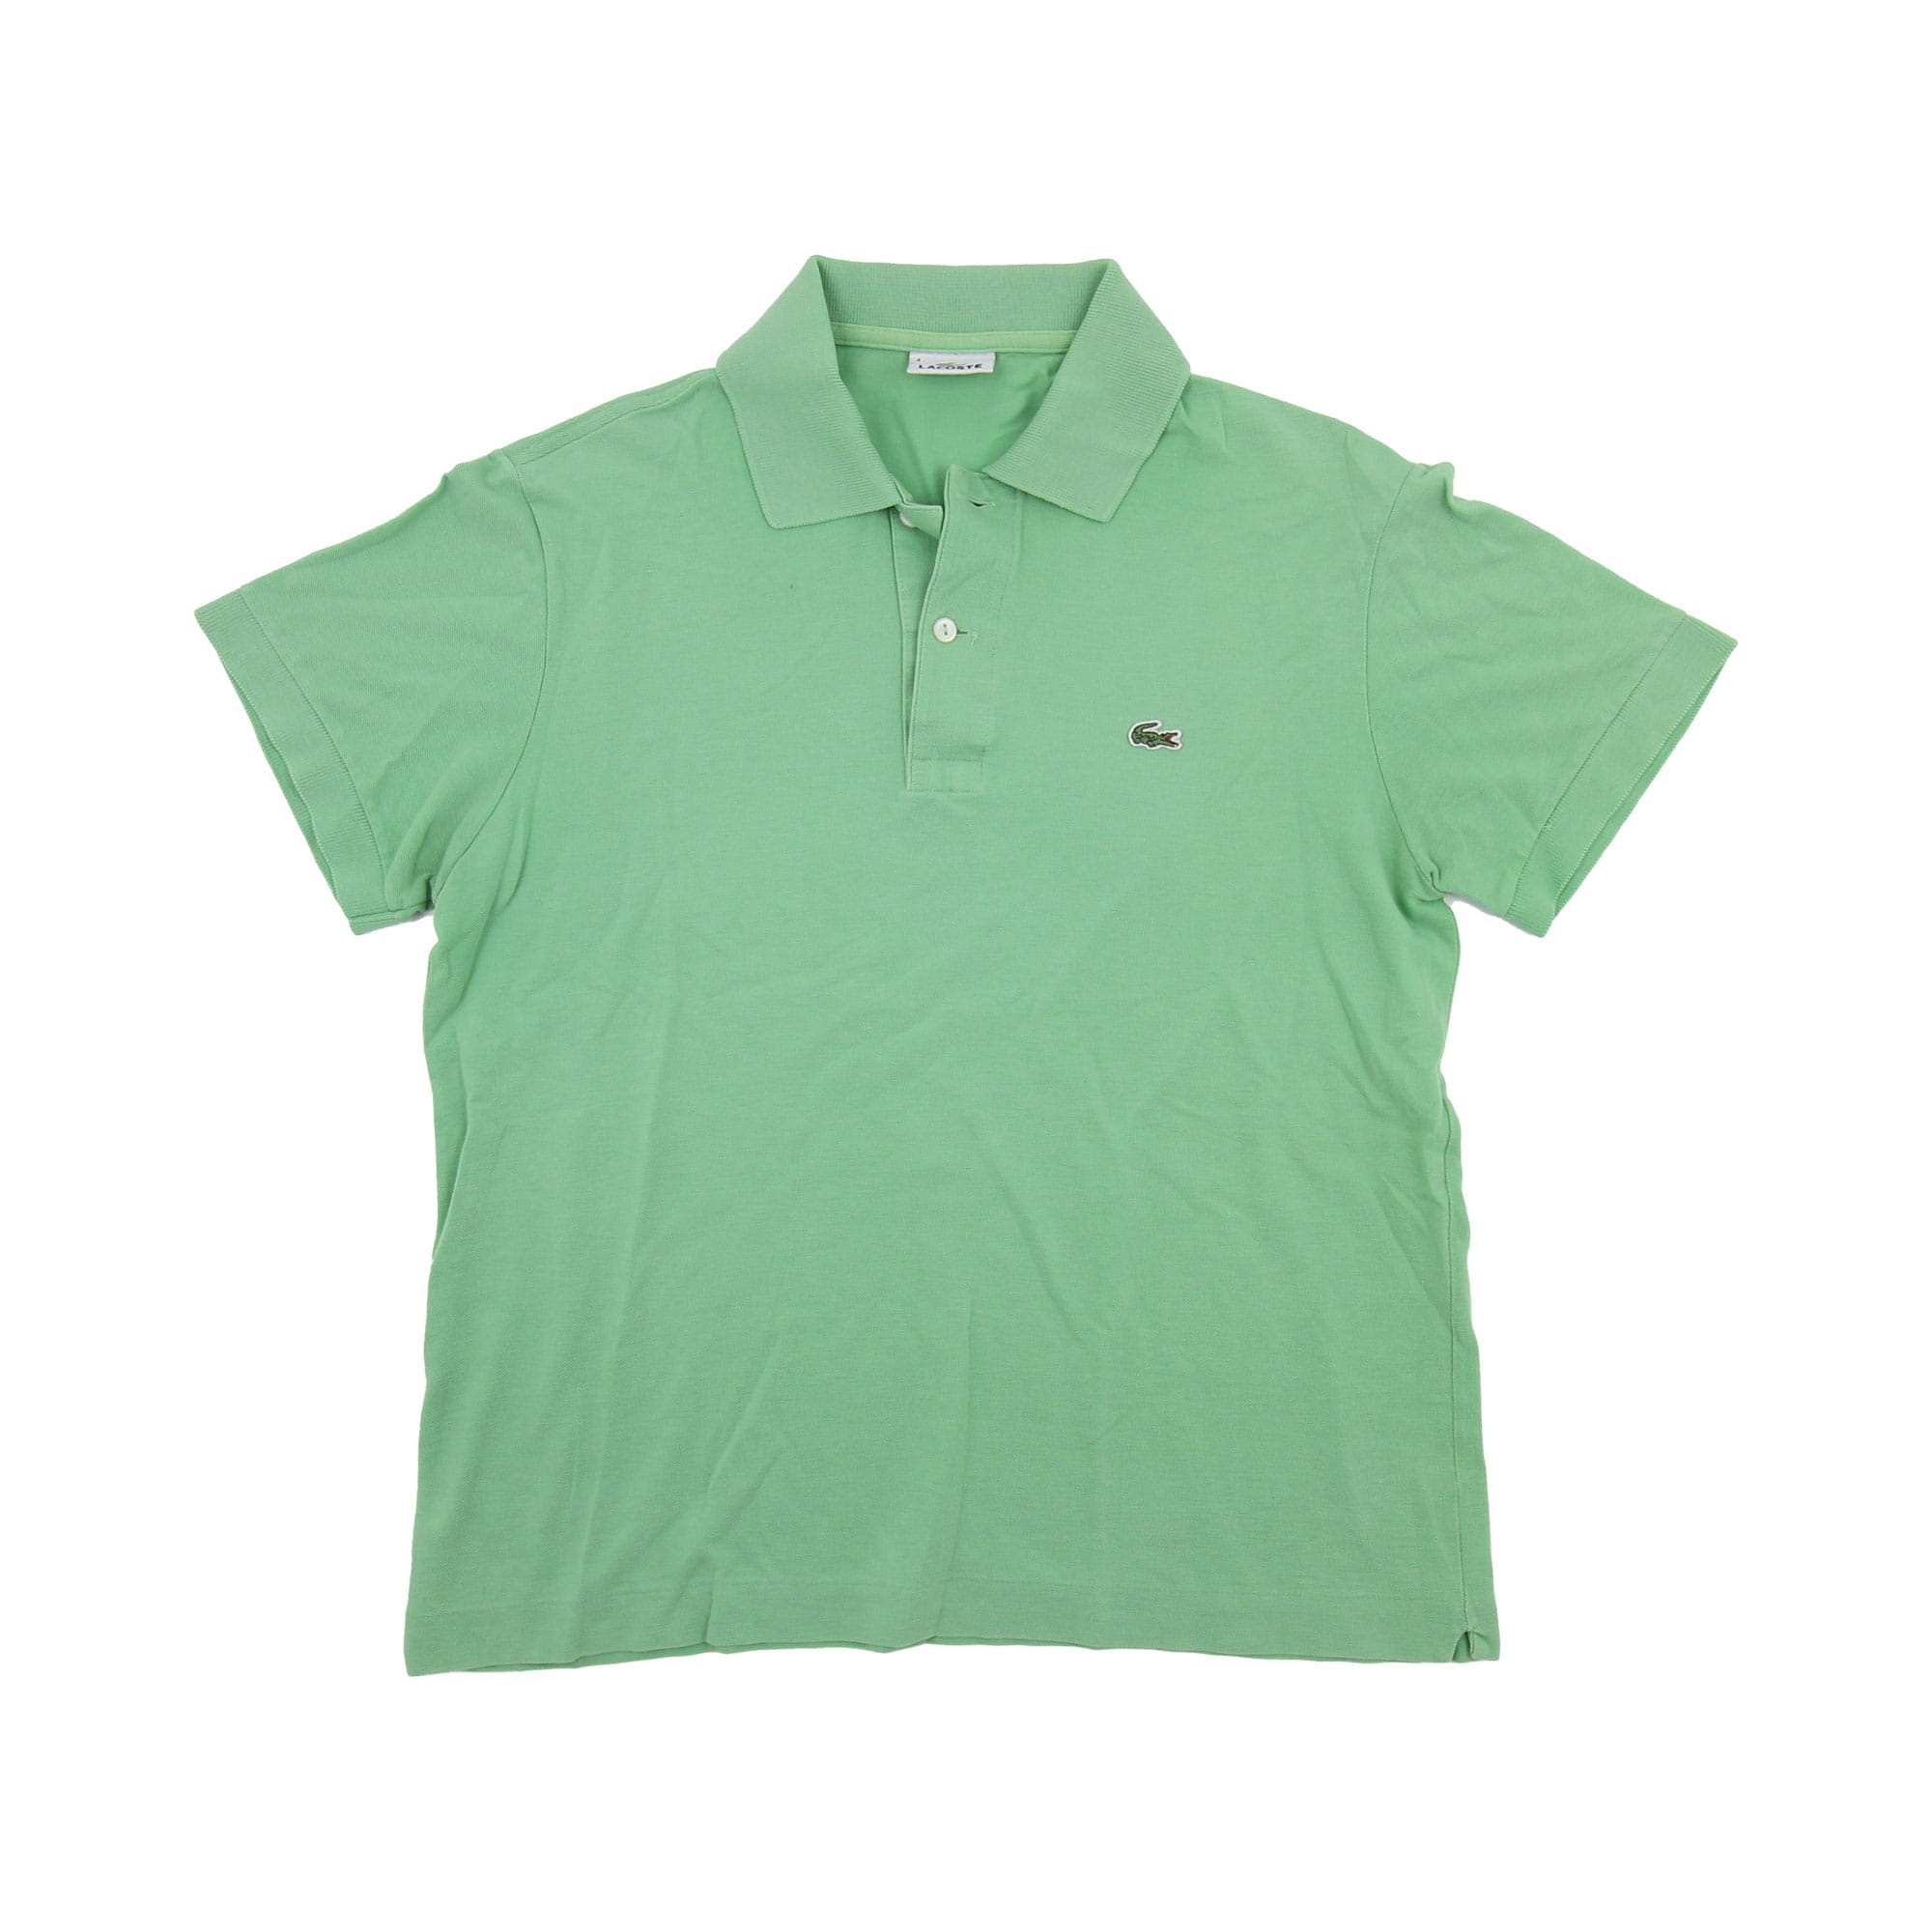 Lacoste Vintage Green Polo - S